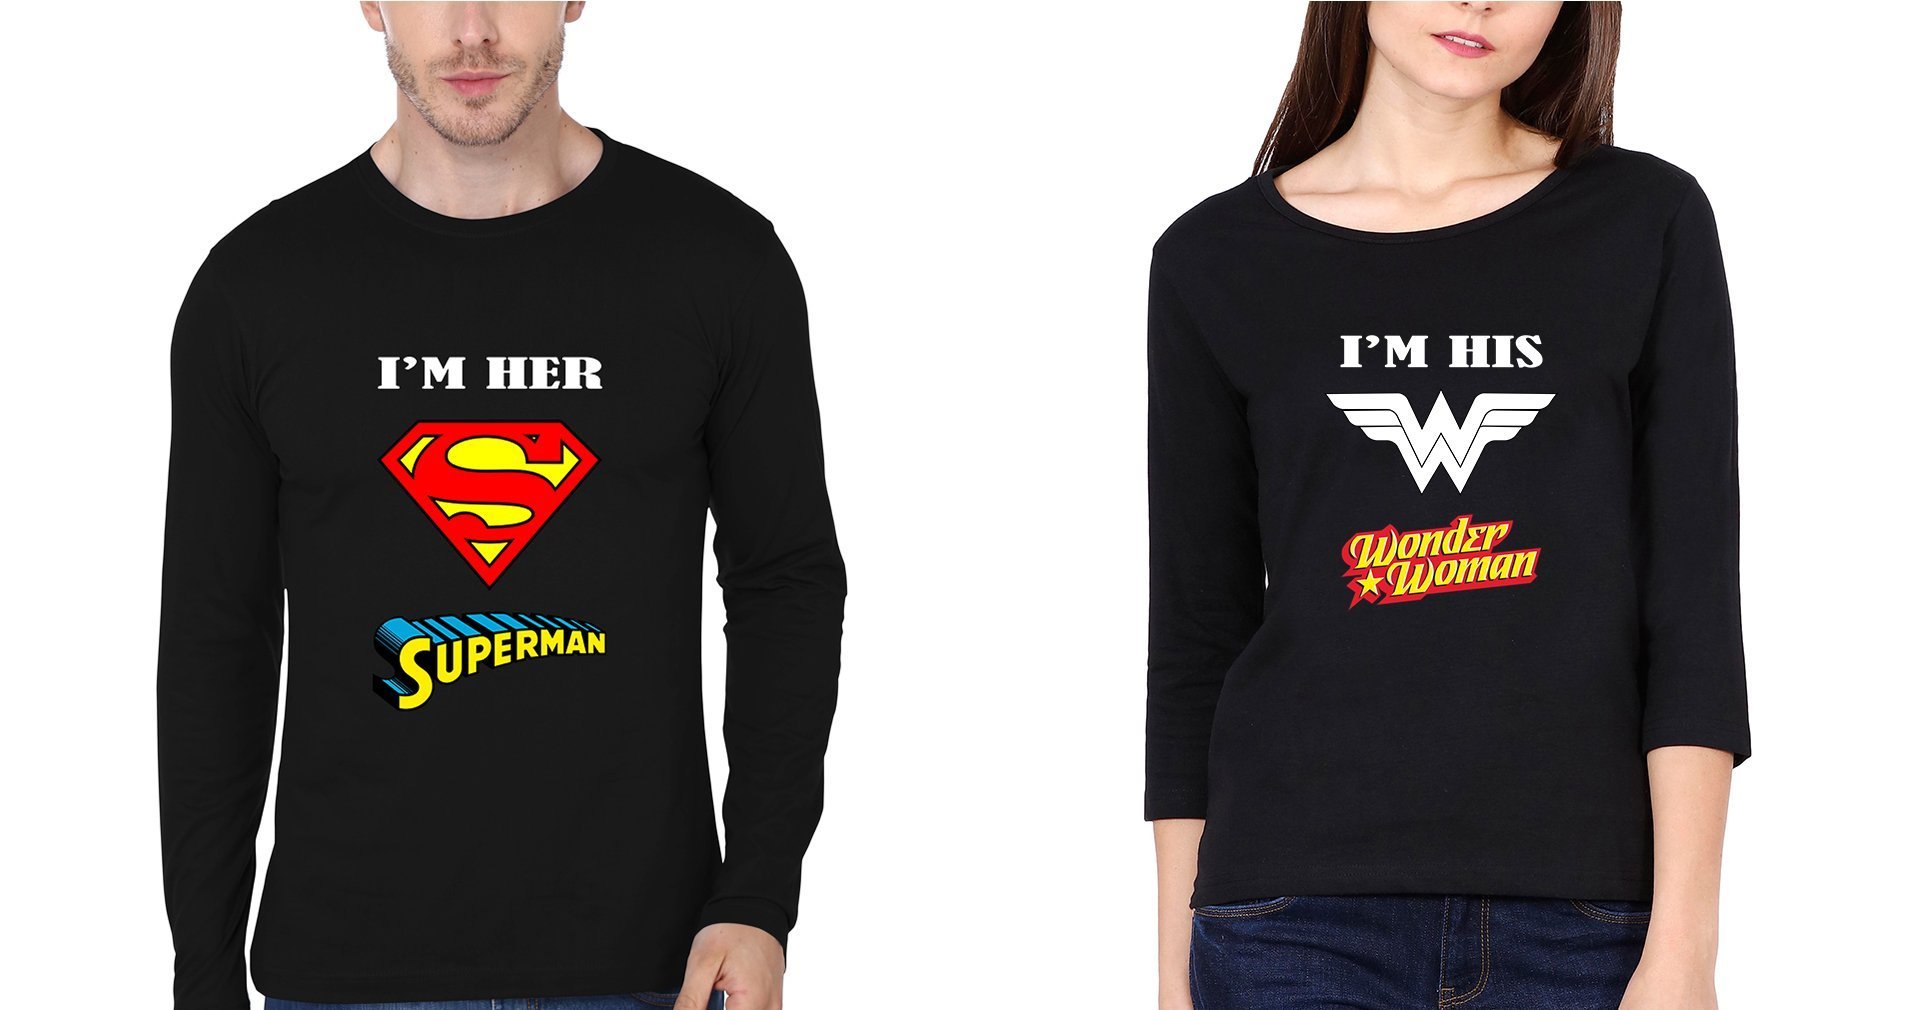 I'M Her Superman And I'M His Wonder Woman Couple Full Sleeves T-Shirts -FunkyTradition - FunkyTradition